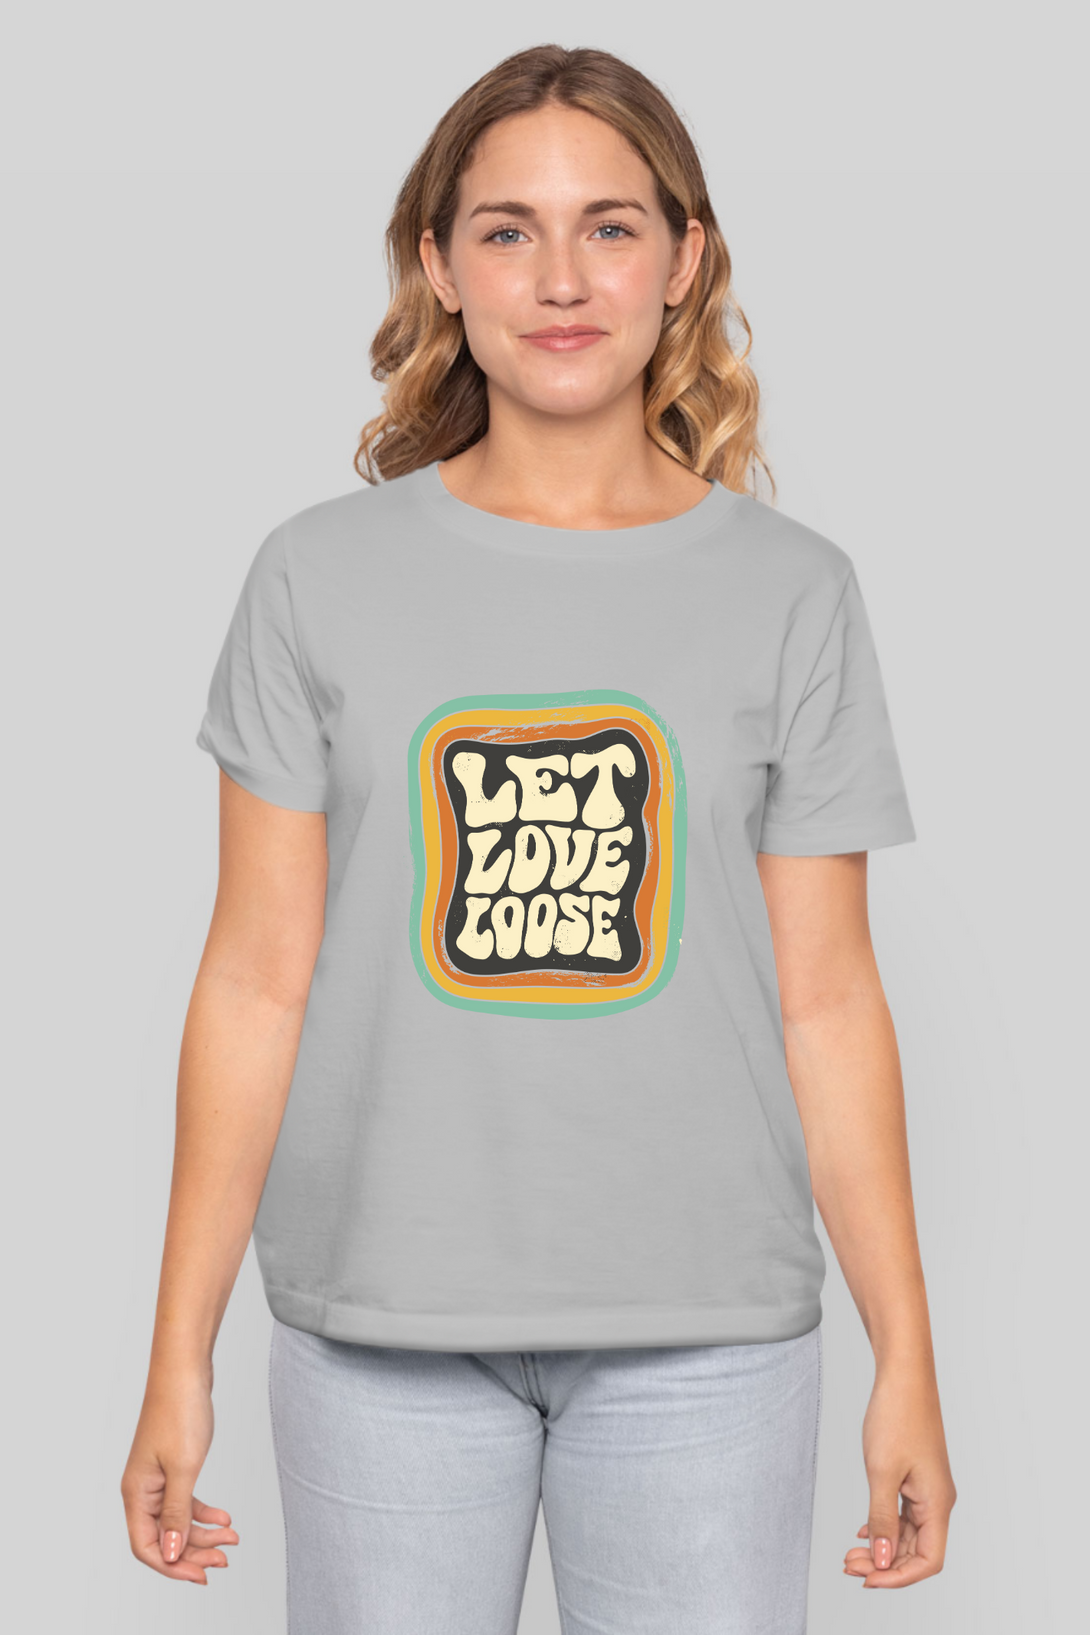 Let Love Loose Printed T-Shirt For Women - WowWaves - 6